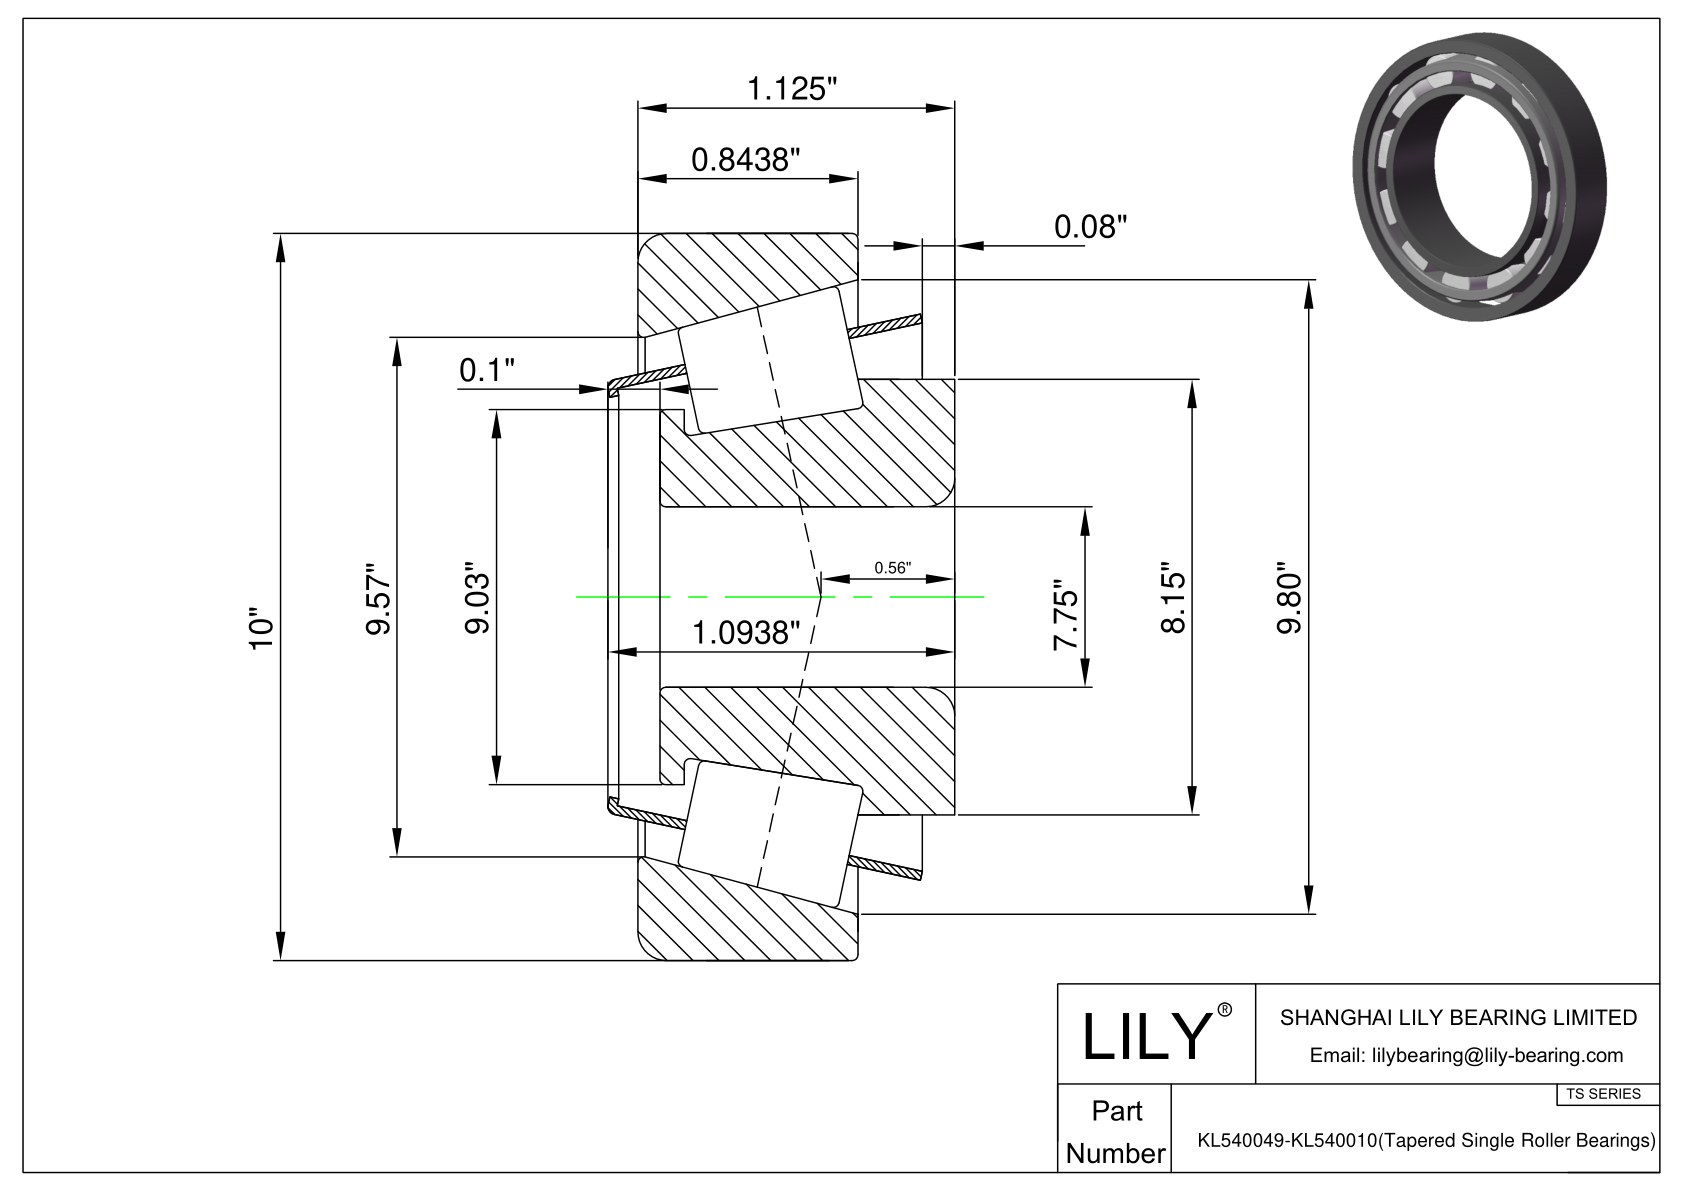 KL540049-KL540010 TS (Tapered Single Roller Bearings) (Imperial) cad drawing